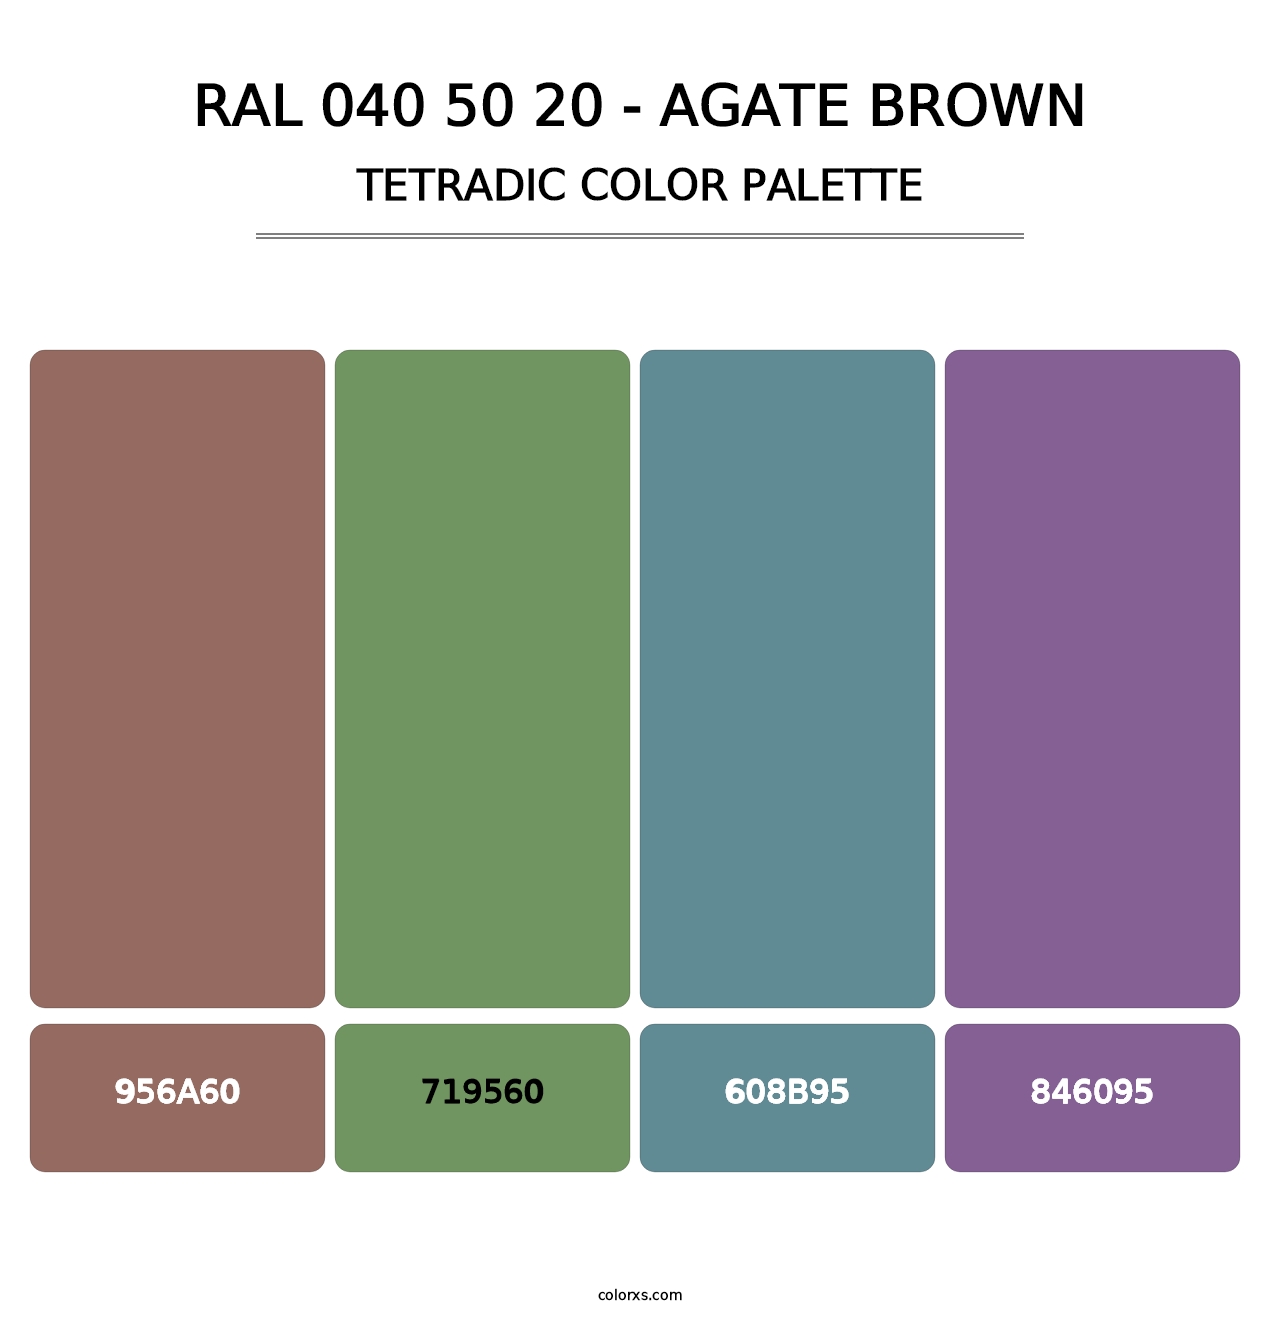 RAL 040 50 20 - Agate Brown - Tetradic Color Palette